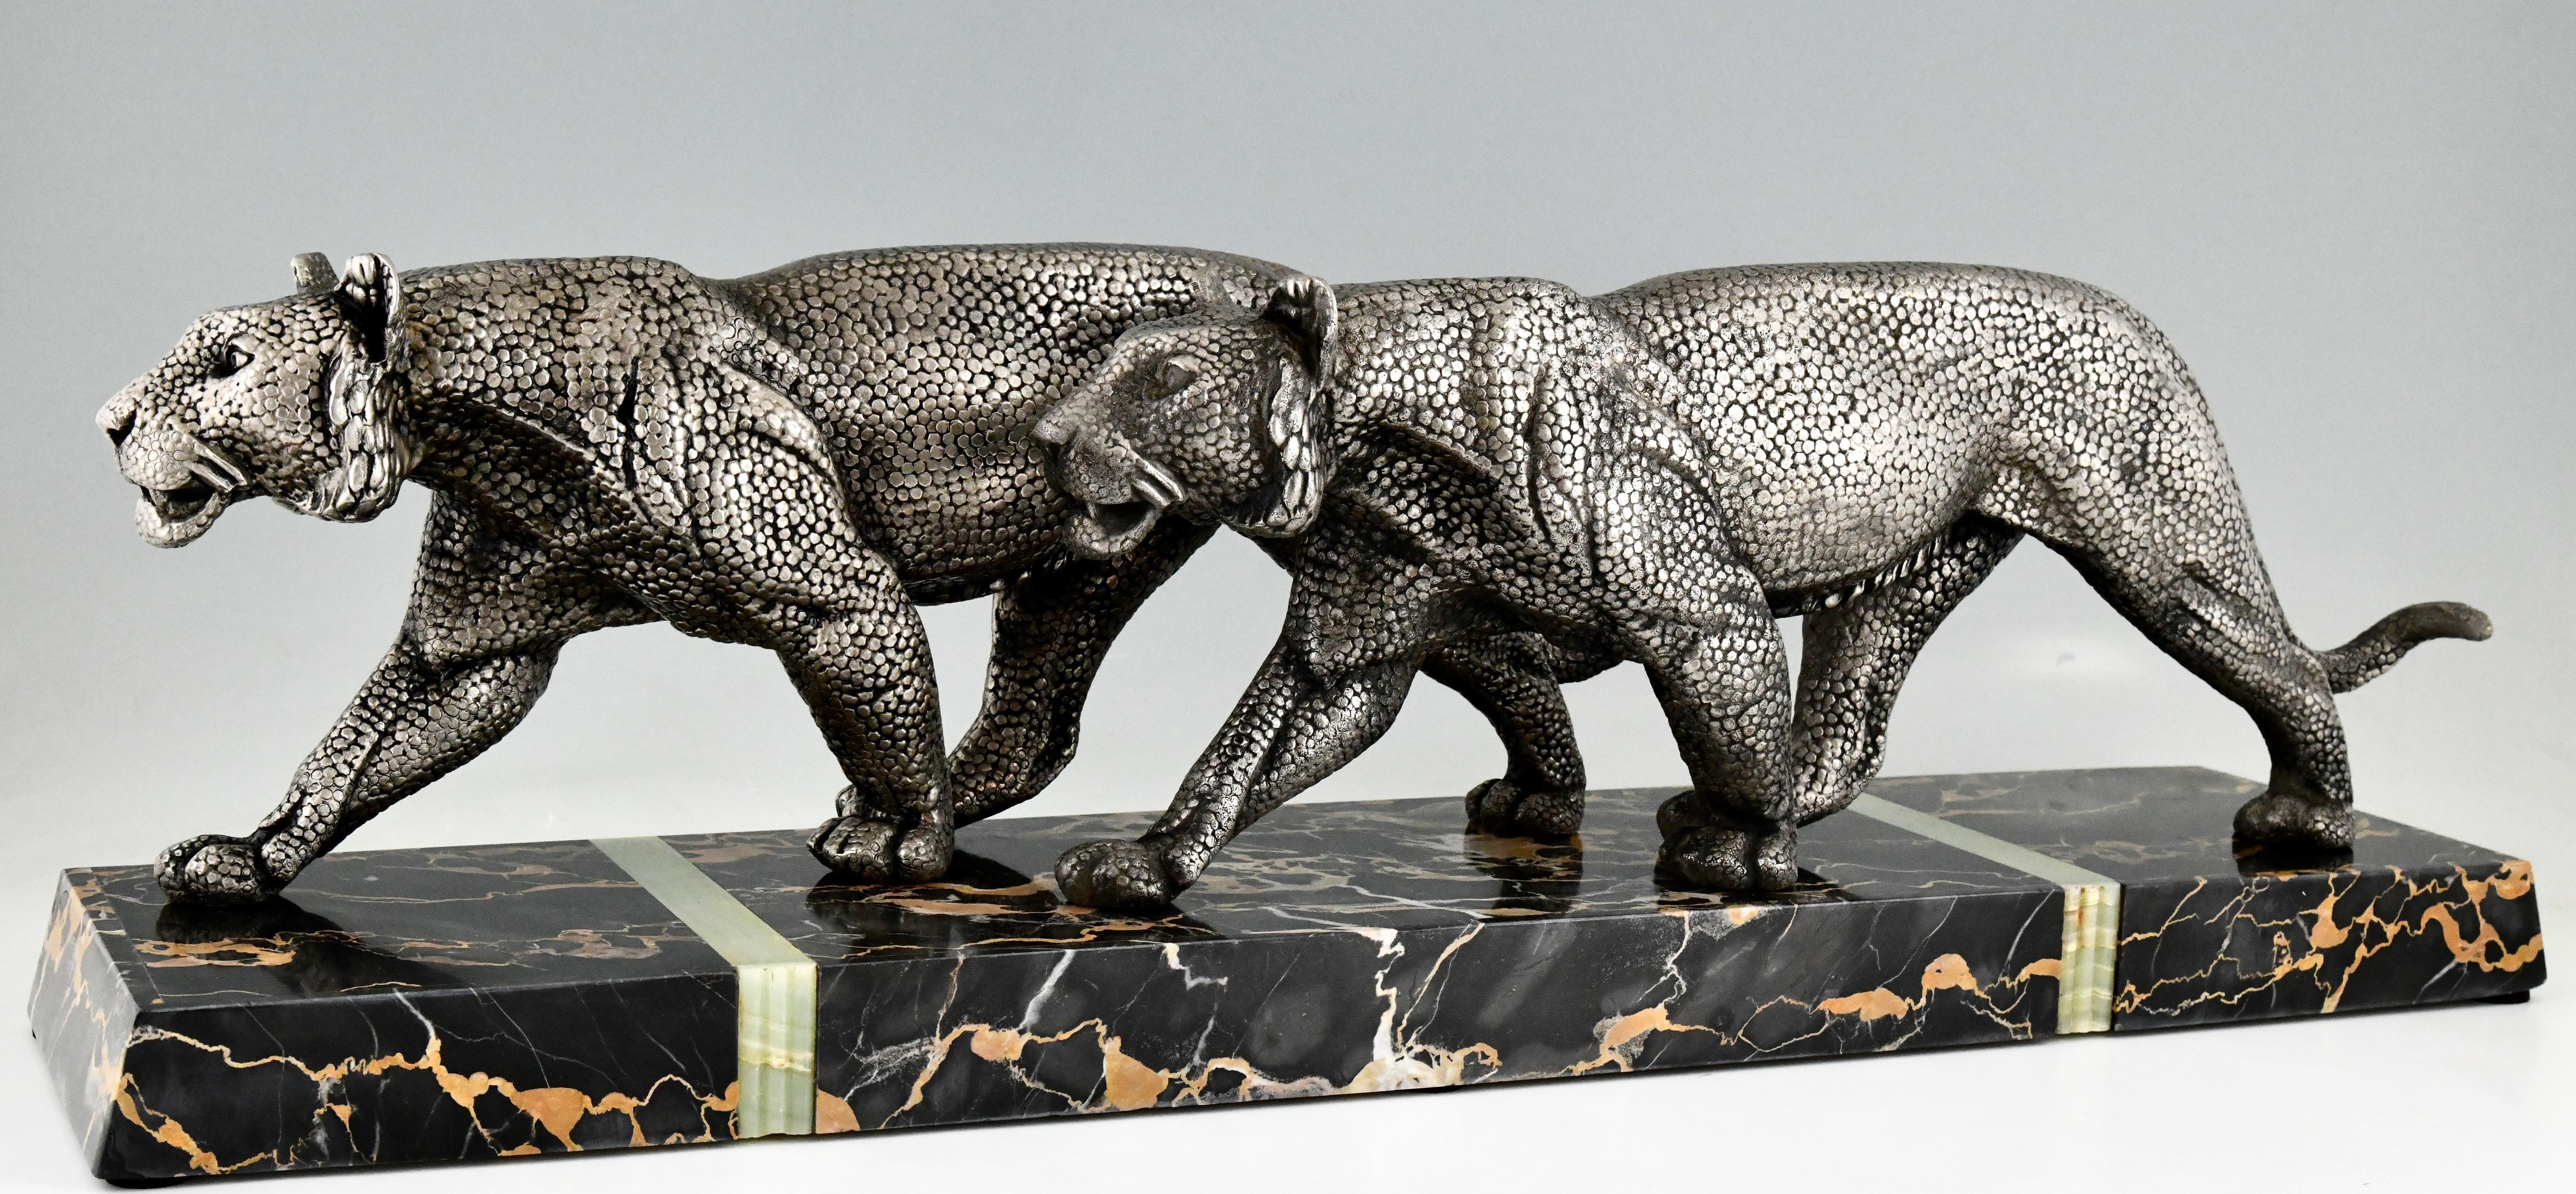 Art Deco sculpture of two panthers signed by Rulas, France 1930. Art Metal with silver patina on Portor marble base with onyx inlay.